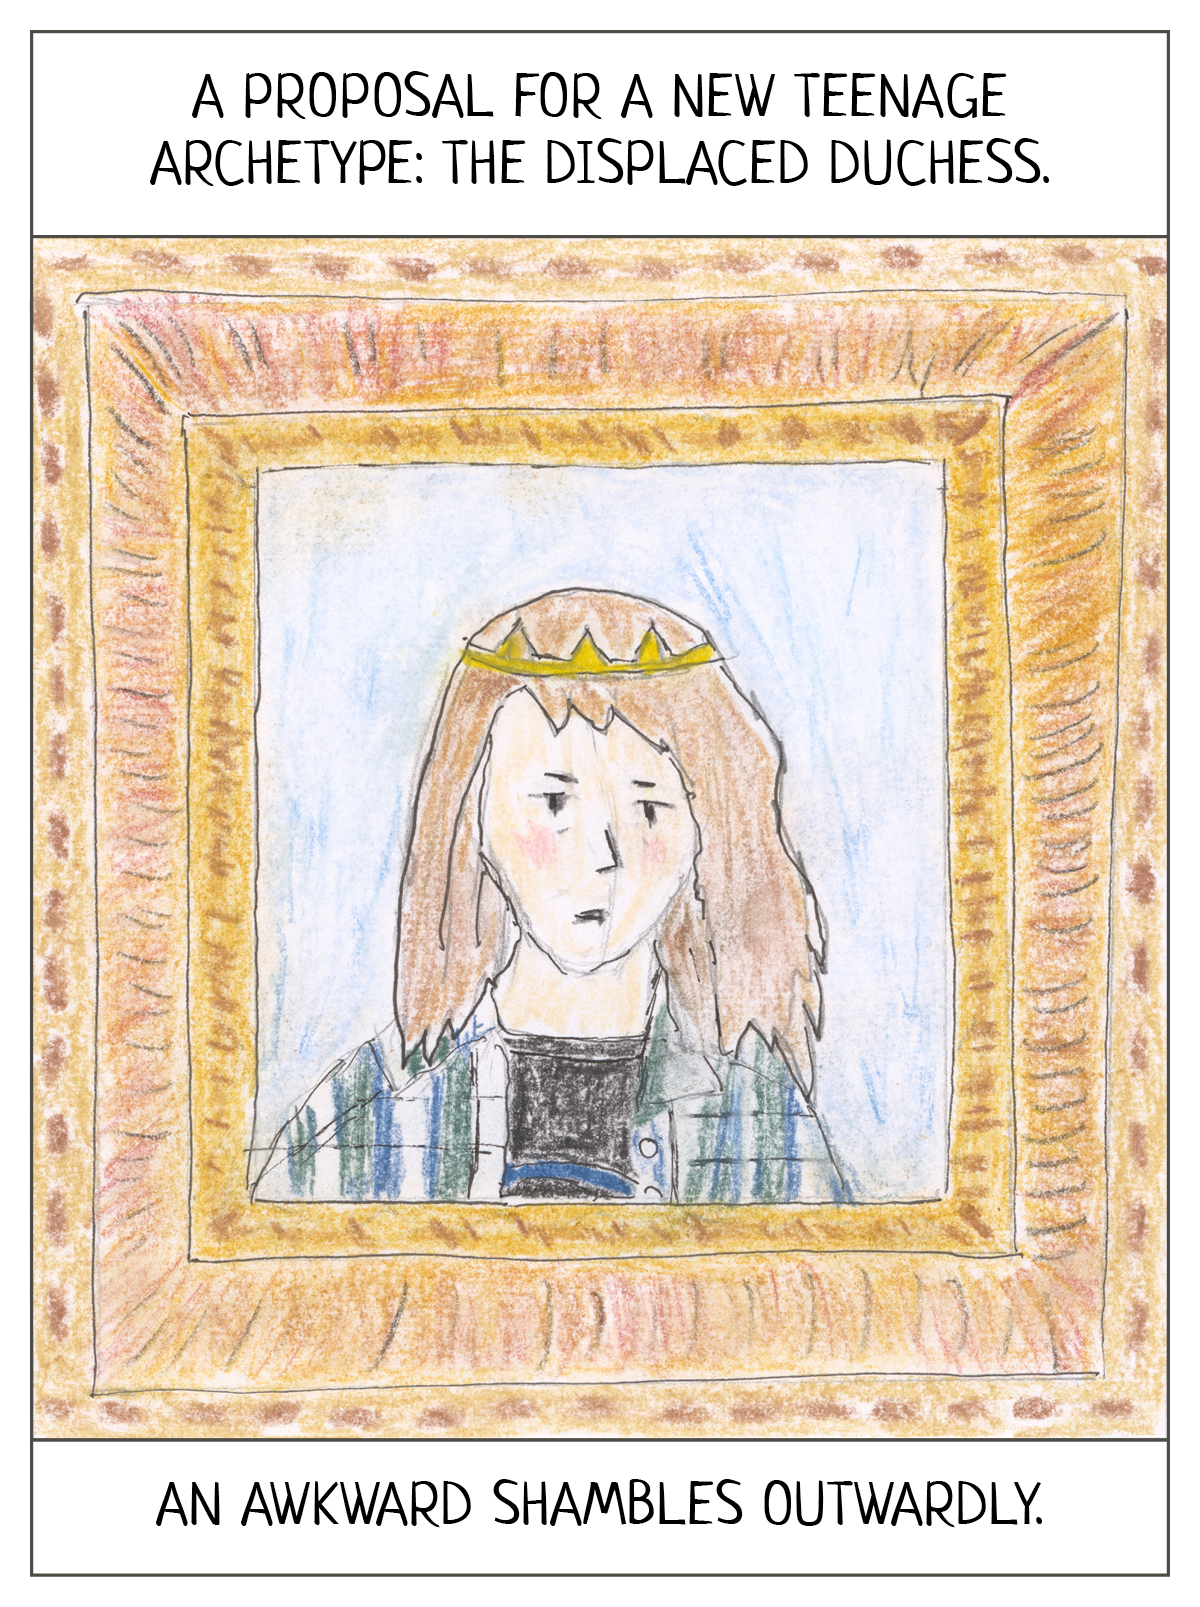 The caption reads: A proposal for a new teenage archetype: the displaced duchess. An awkward shambles outwardly.   The image shows a school picture of a  teen girl, white with long brown hair and wearing a Germs t-shirt and a duchess tiara. The picture is enclosed in an elaborate frame.